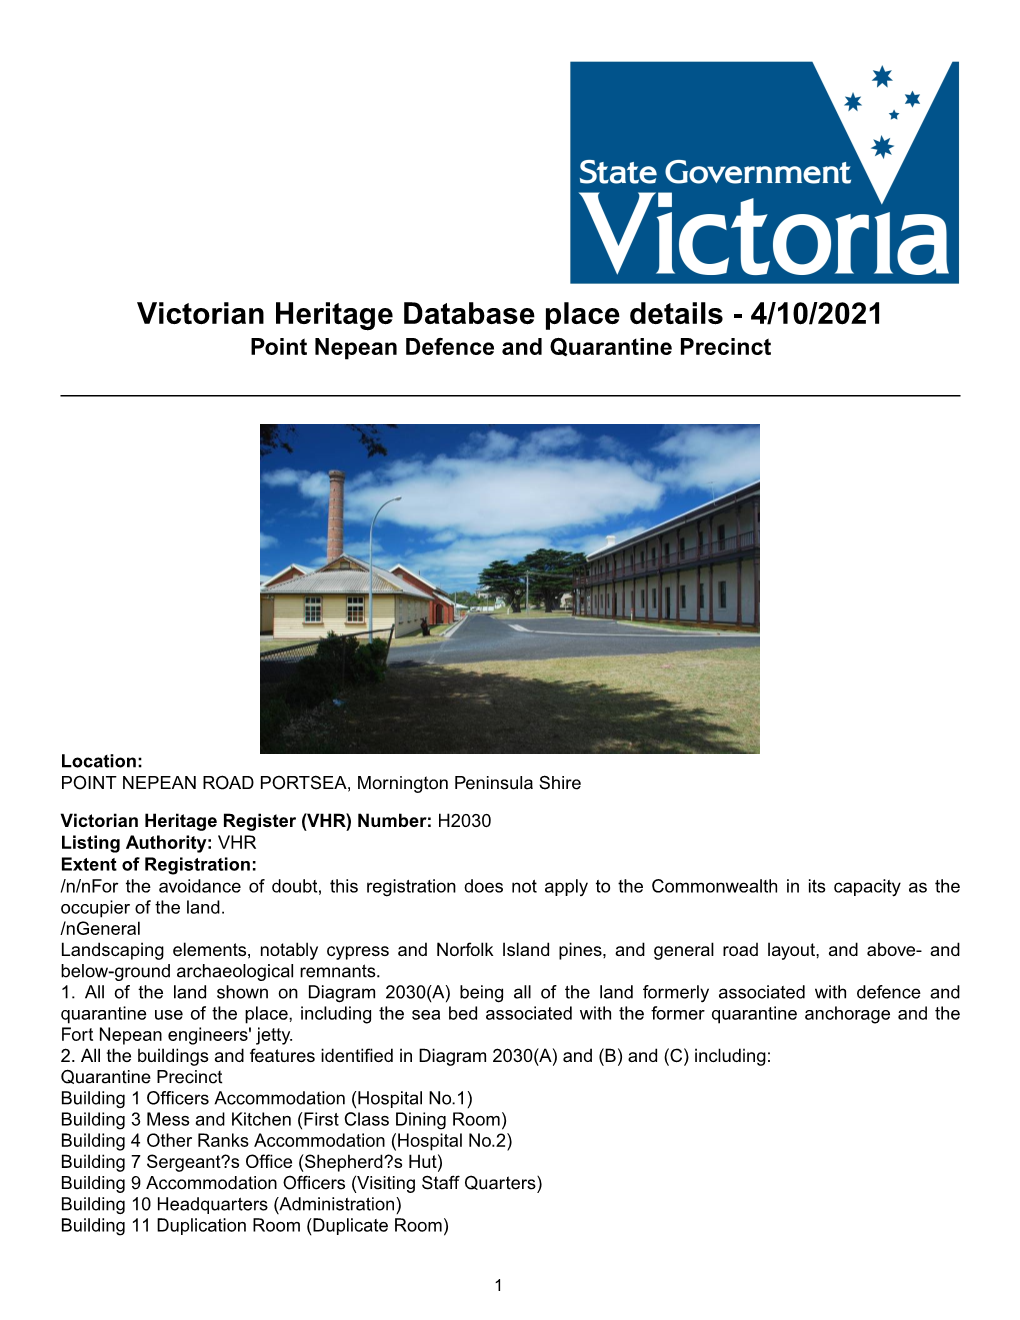 Victorian Heritage Database Place Details - 4/10/2021 Point Nepean Defence and Quarantine Precinct